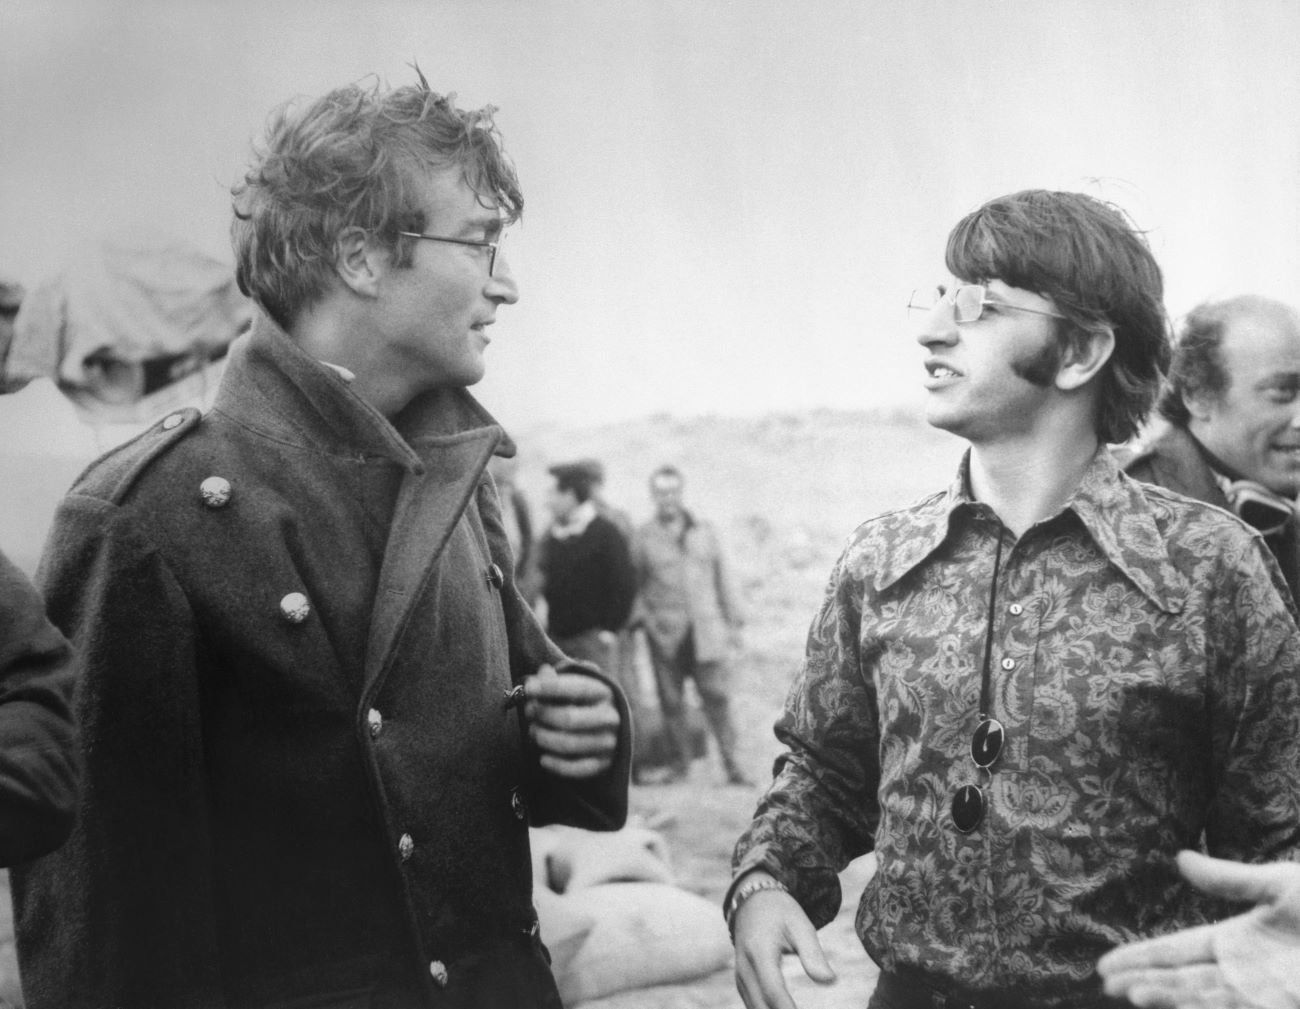 A black and white picture of John Lennon and Ringo Starr talking in a field. 